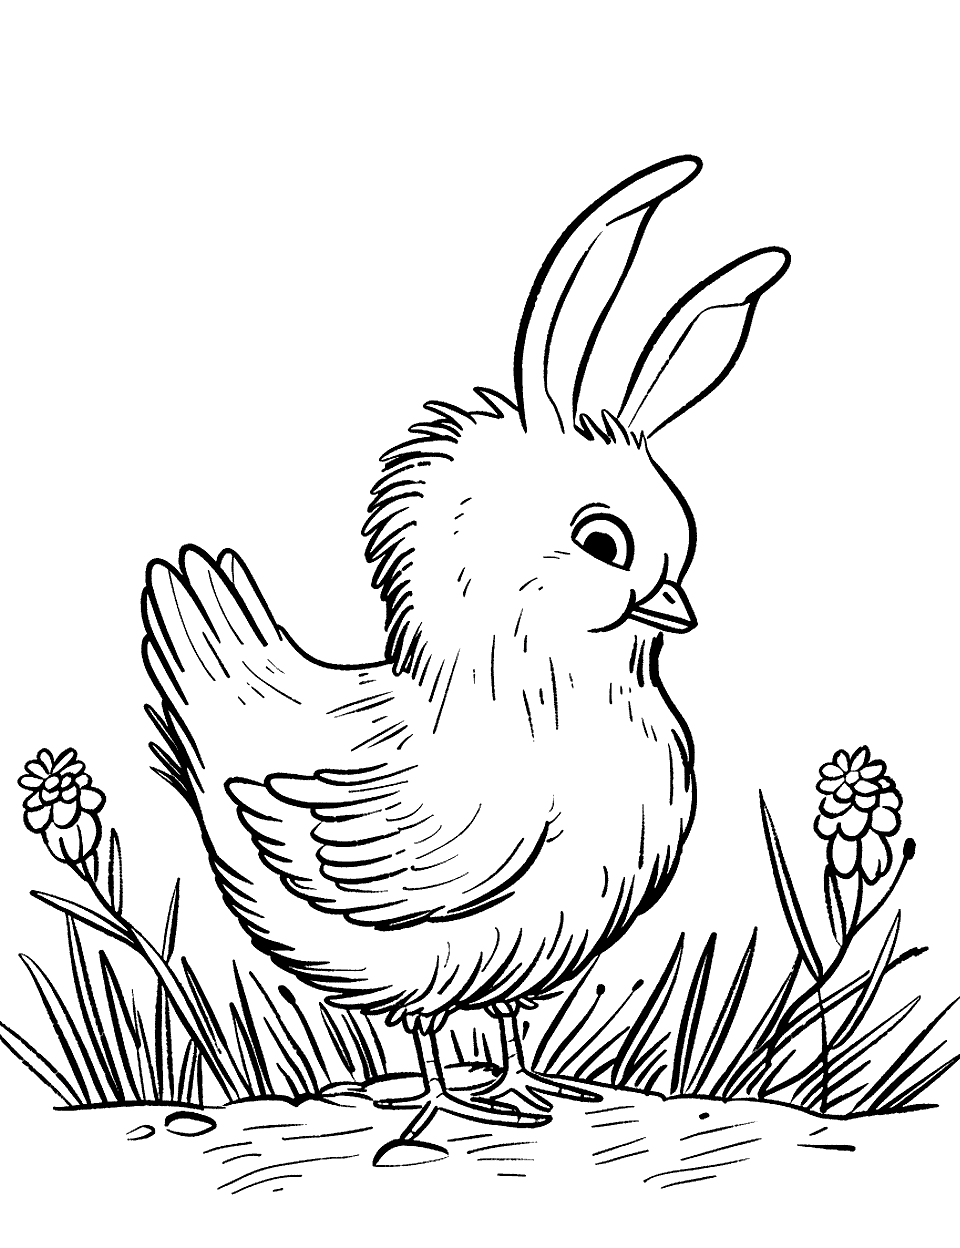 Bunny-Shaped Chicken Coloring Page - A whimsical scene with a chicken playfully shaped like a bunny, blending themes of Easter and whimsy.